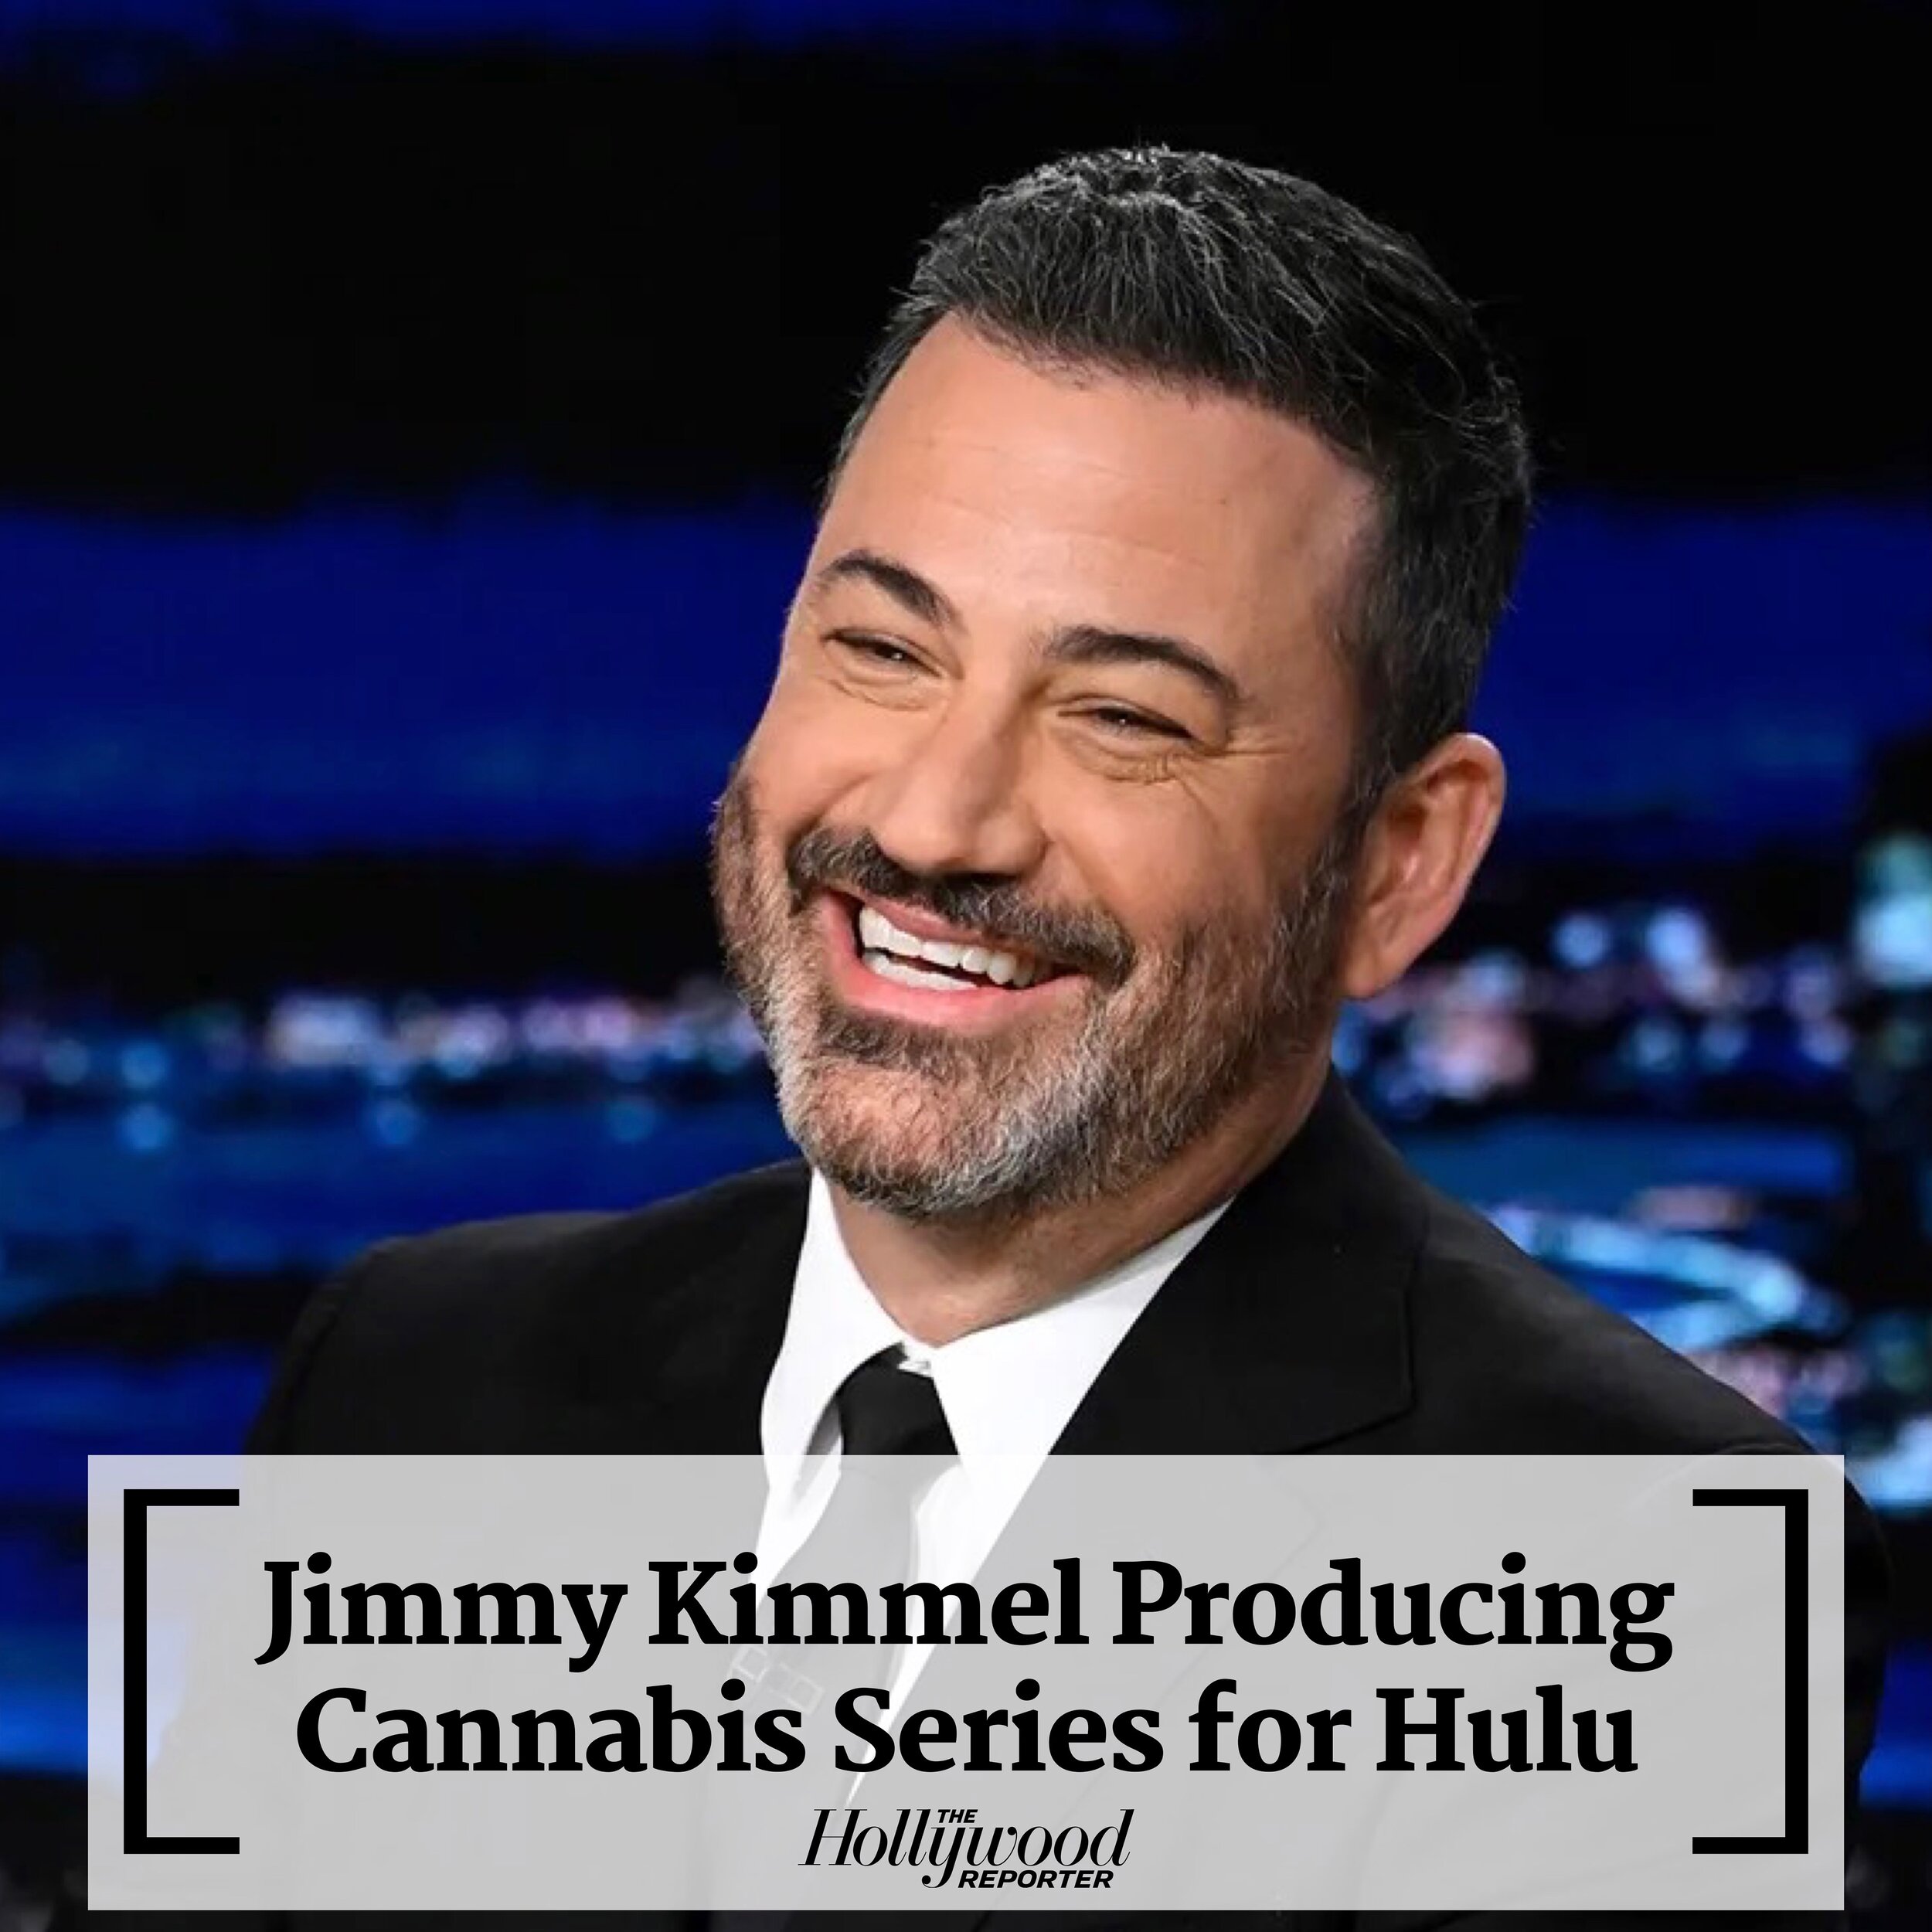 &ldquo;High Hopes&rdquo; produced by @jimmykimmel and #Kimmelot is coming to @hulu on April 20th! The show will follow two brothers running a cannabis store in Los Angeles. 📺